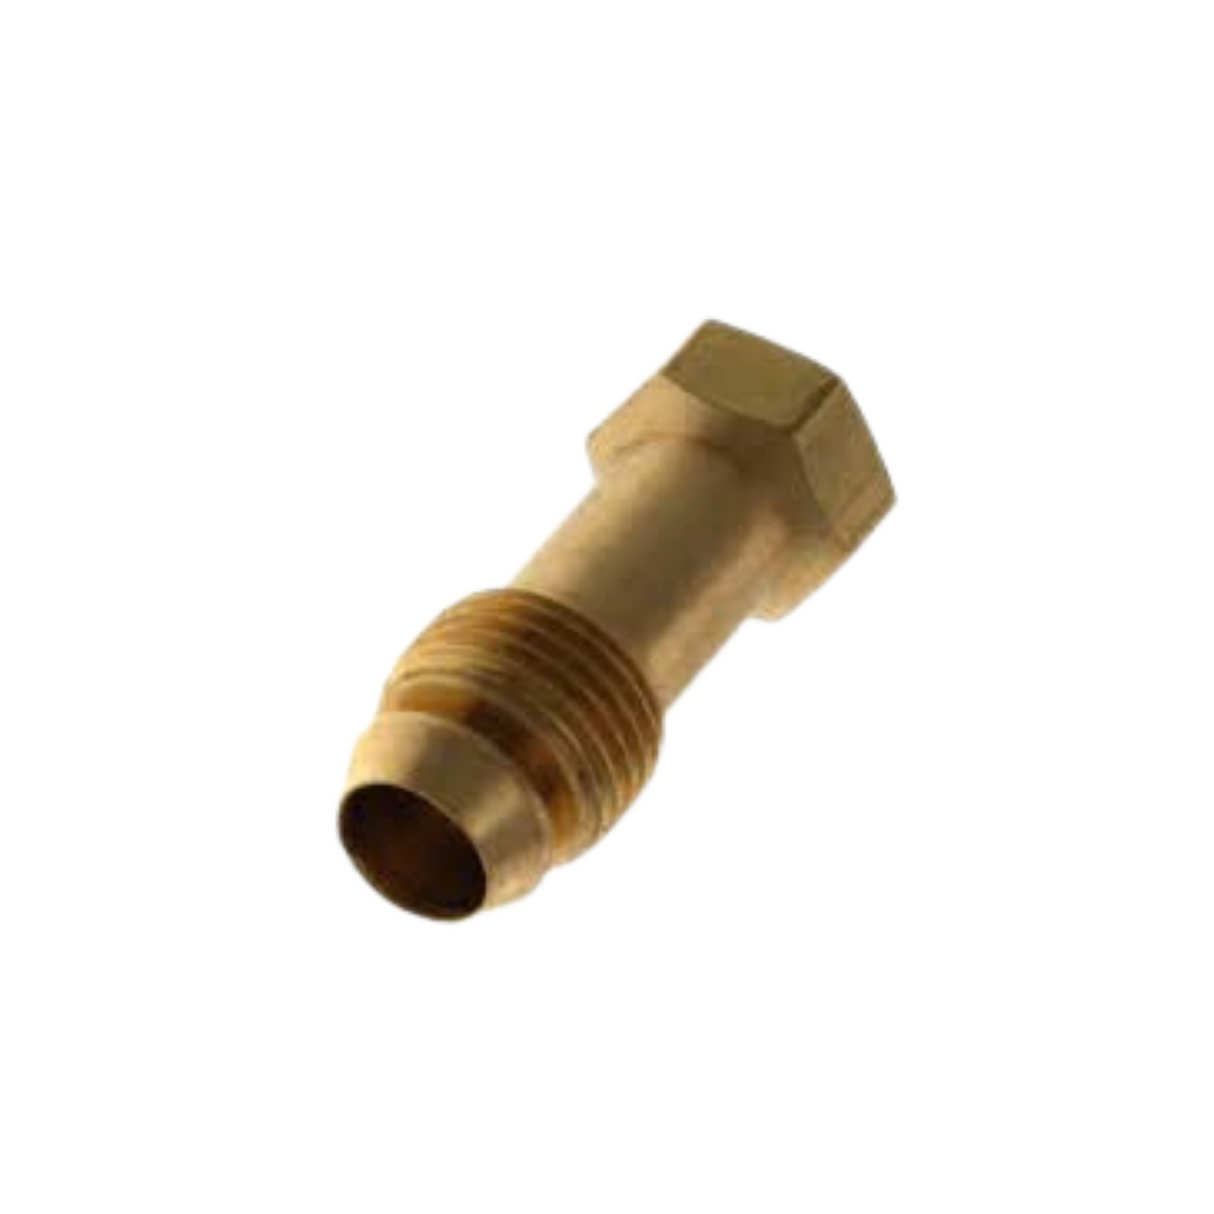 Robertshaw 4590-816 Gas Valve, Extended 1/4" Tubing